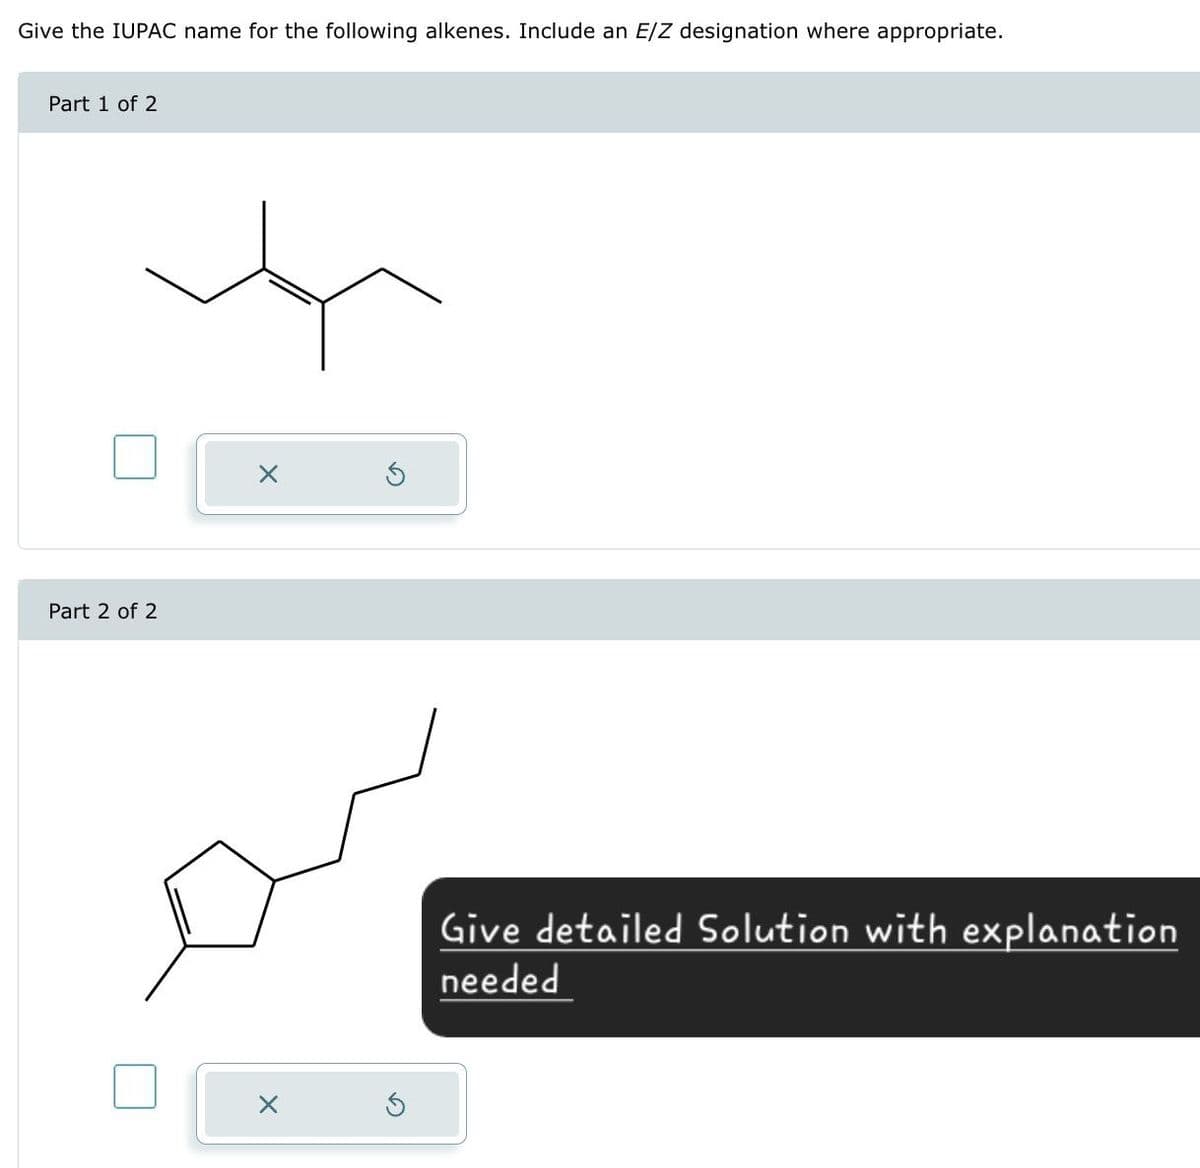 Give the IUPAC name for the following alkenes. Include an E/Z designation where appropriate.
Part 1 of 2
Part 2 of 2
Give detailed Solution with explanation
needed